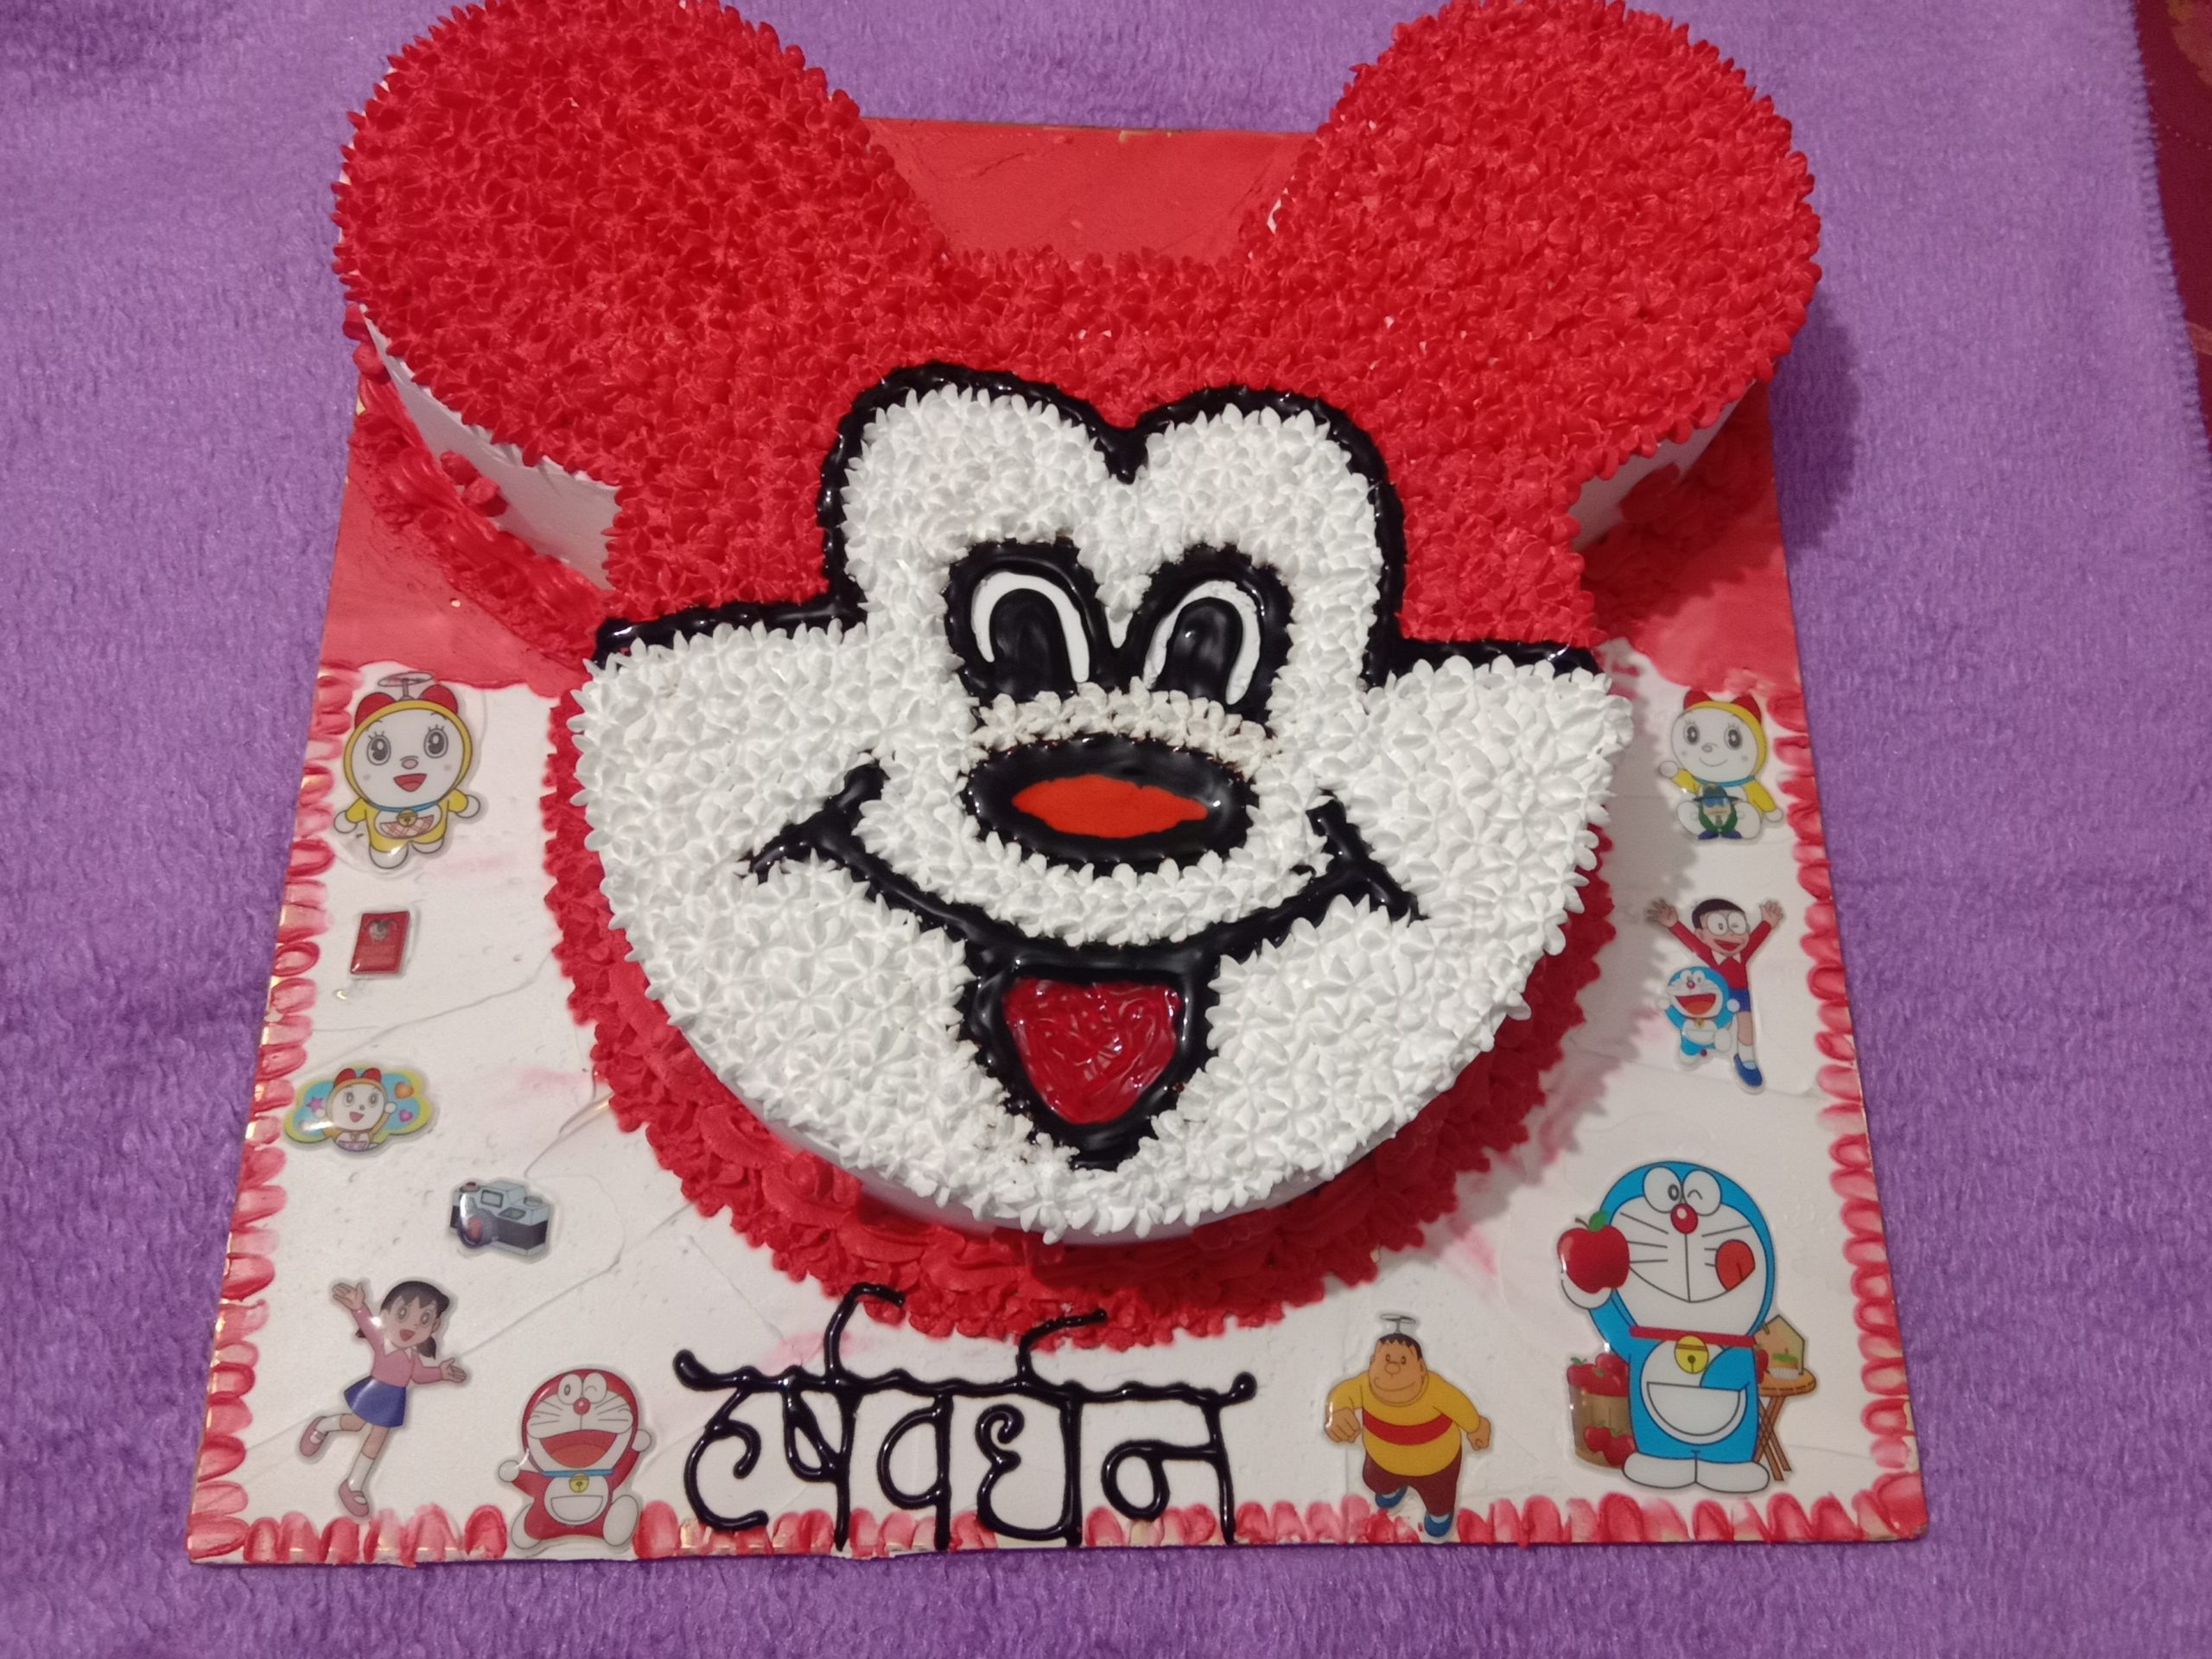 Mickey Mouse Cake with Mix Fruit Flavour Designs, Images, Price Near Me